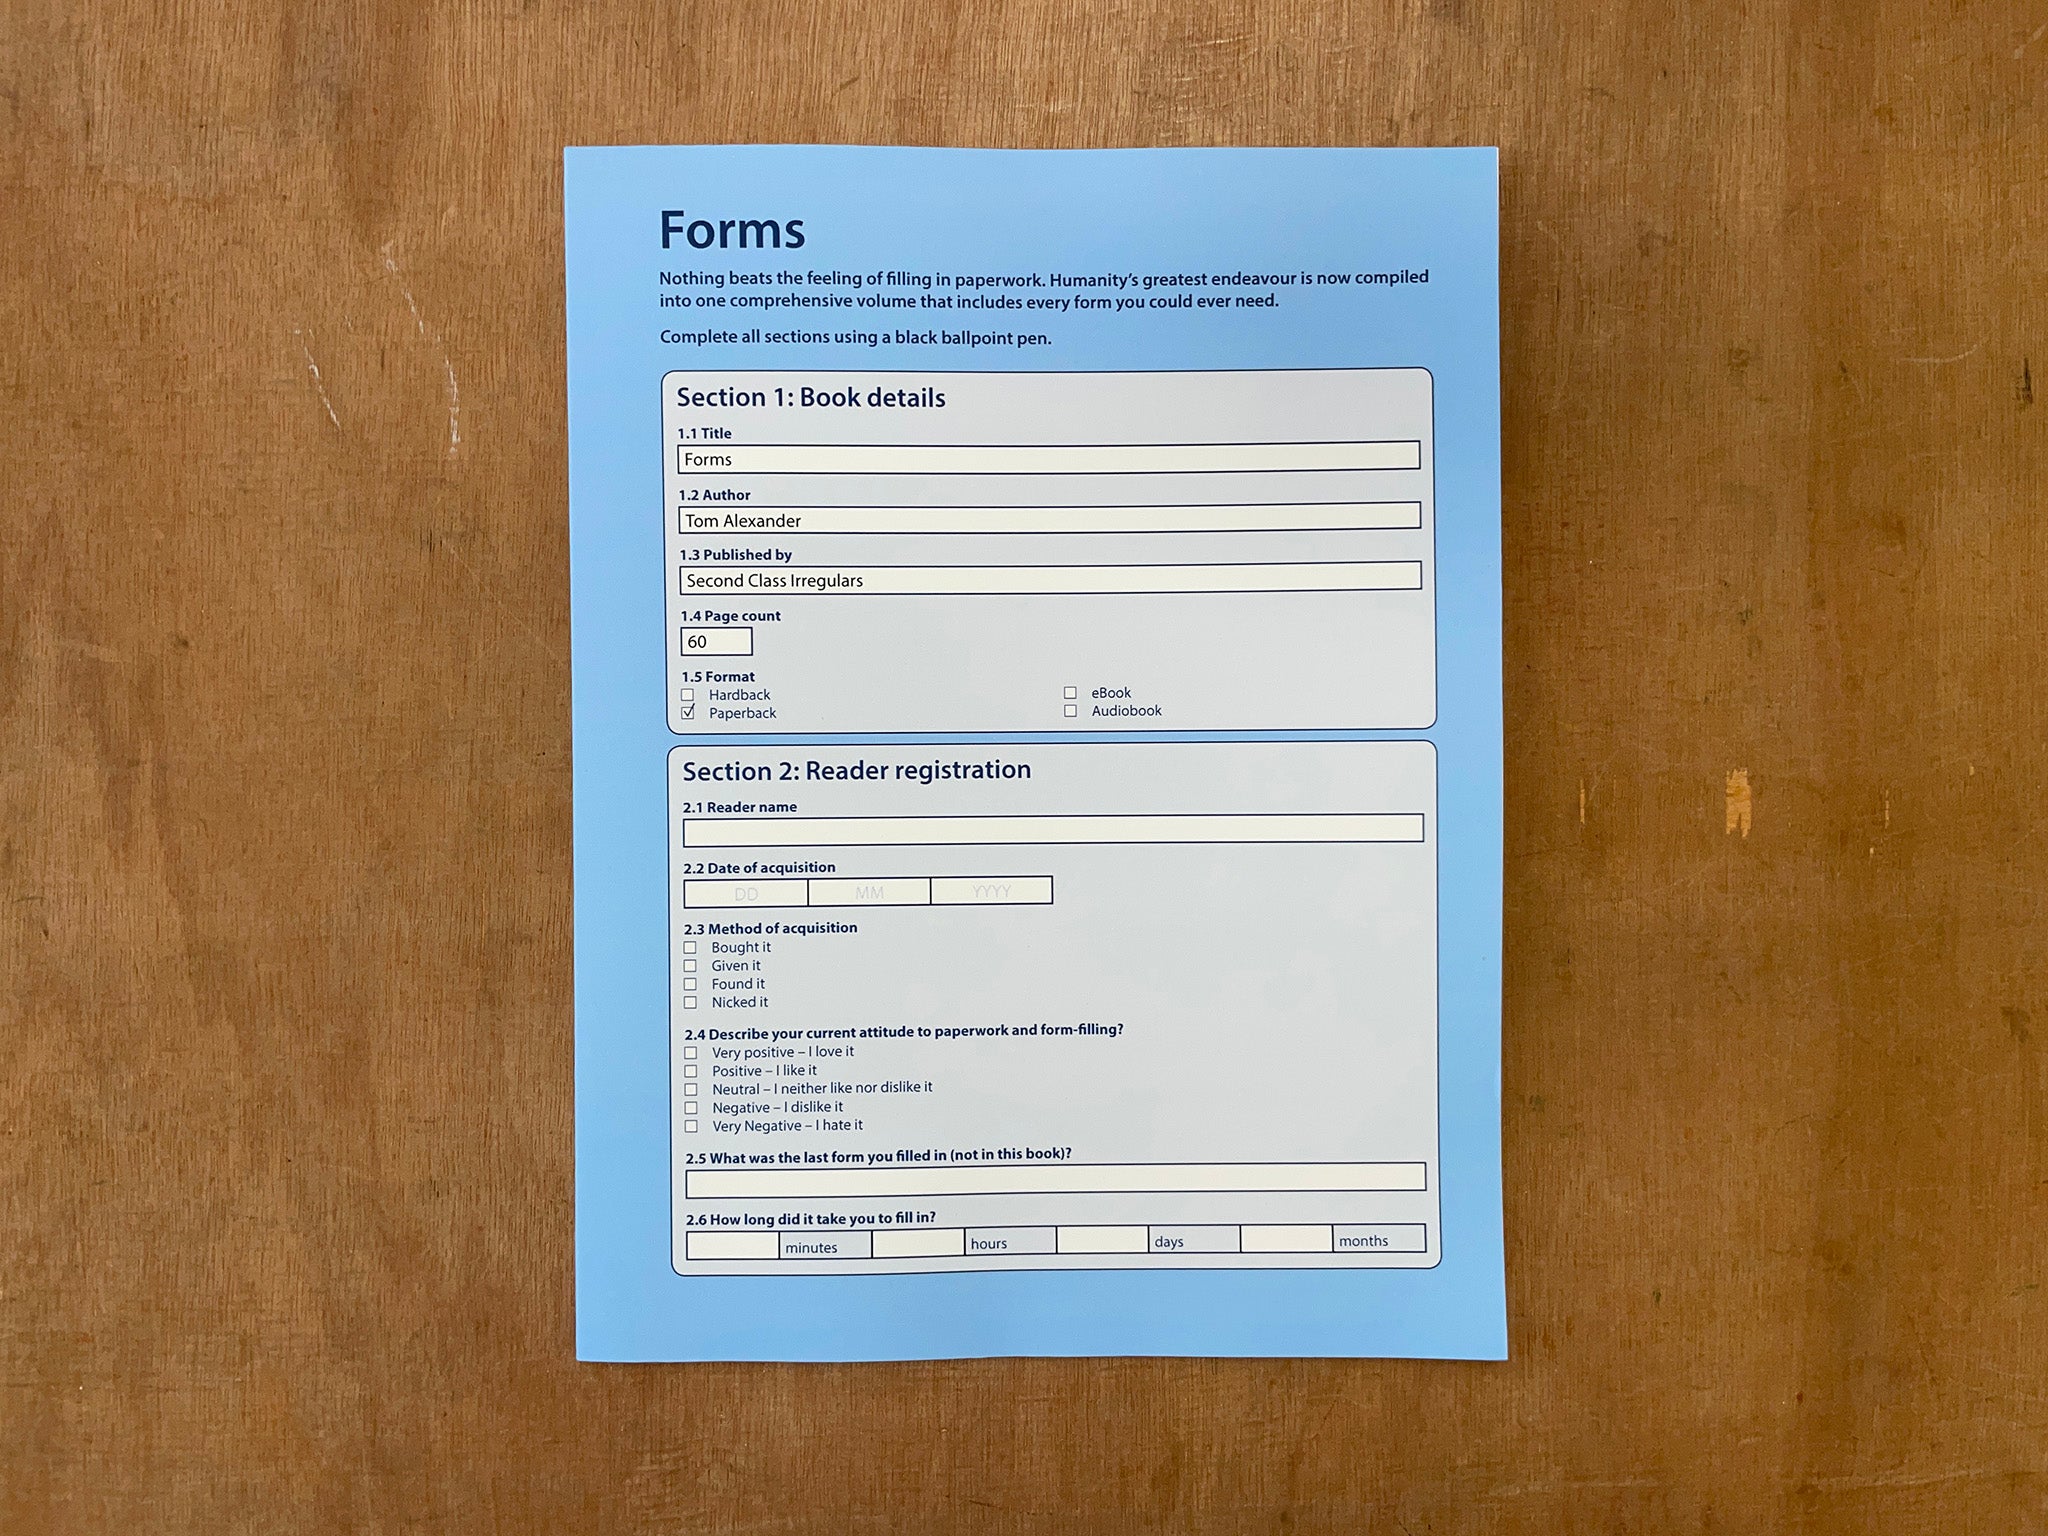 FORMS - THE NATION'S FAVOURITE PAPERWORK by Tom Alexander